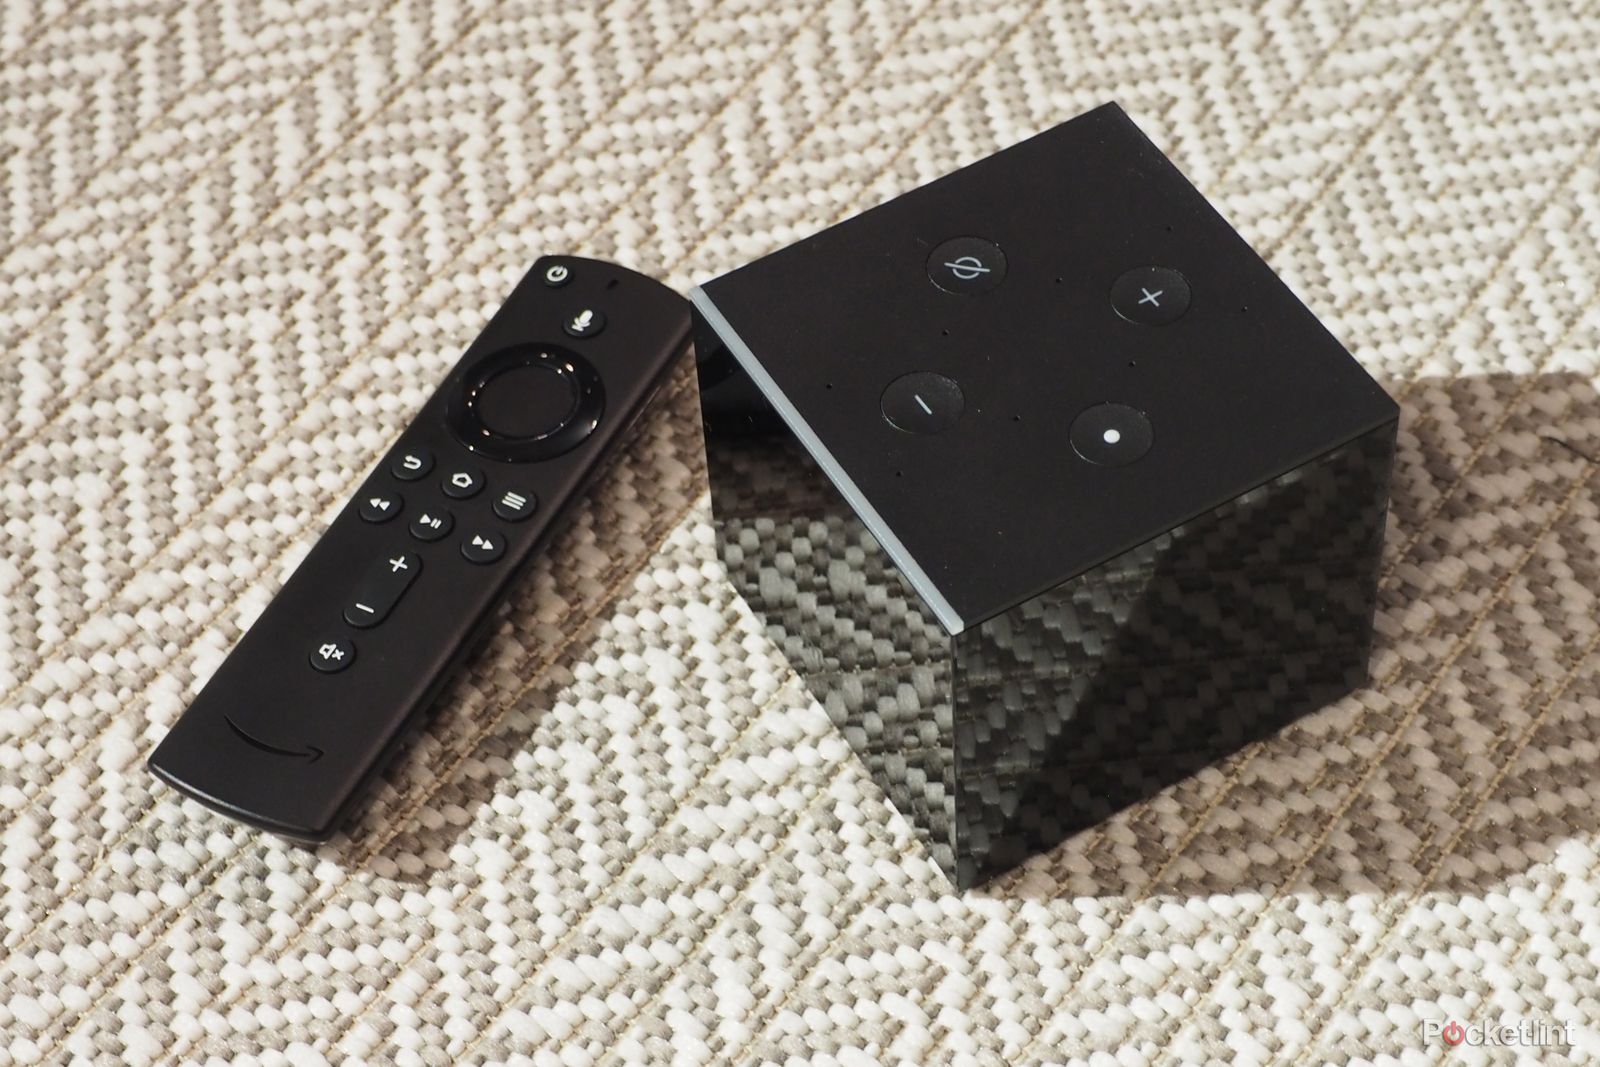 Got a Fire TV Cube? You can now do picture-in-picture for doorbells and cameras photo 1